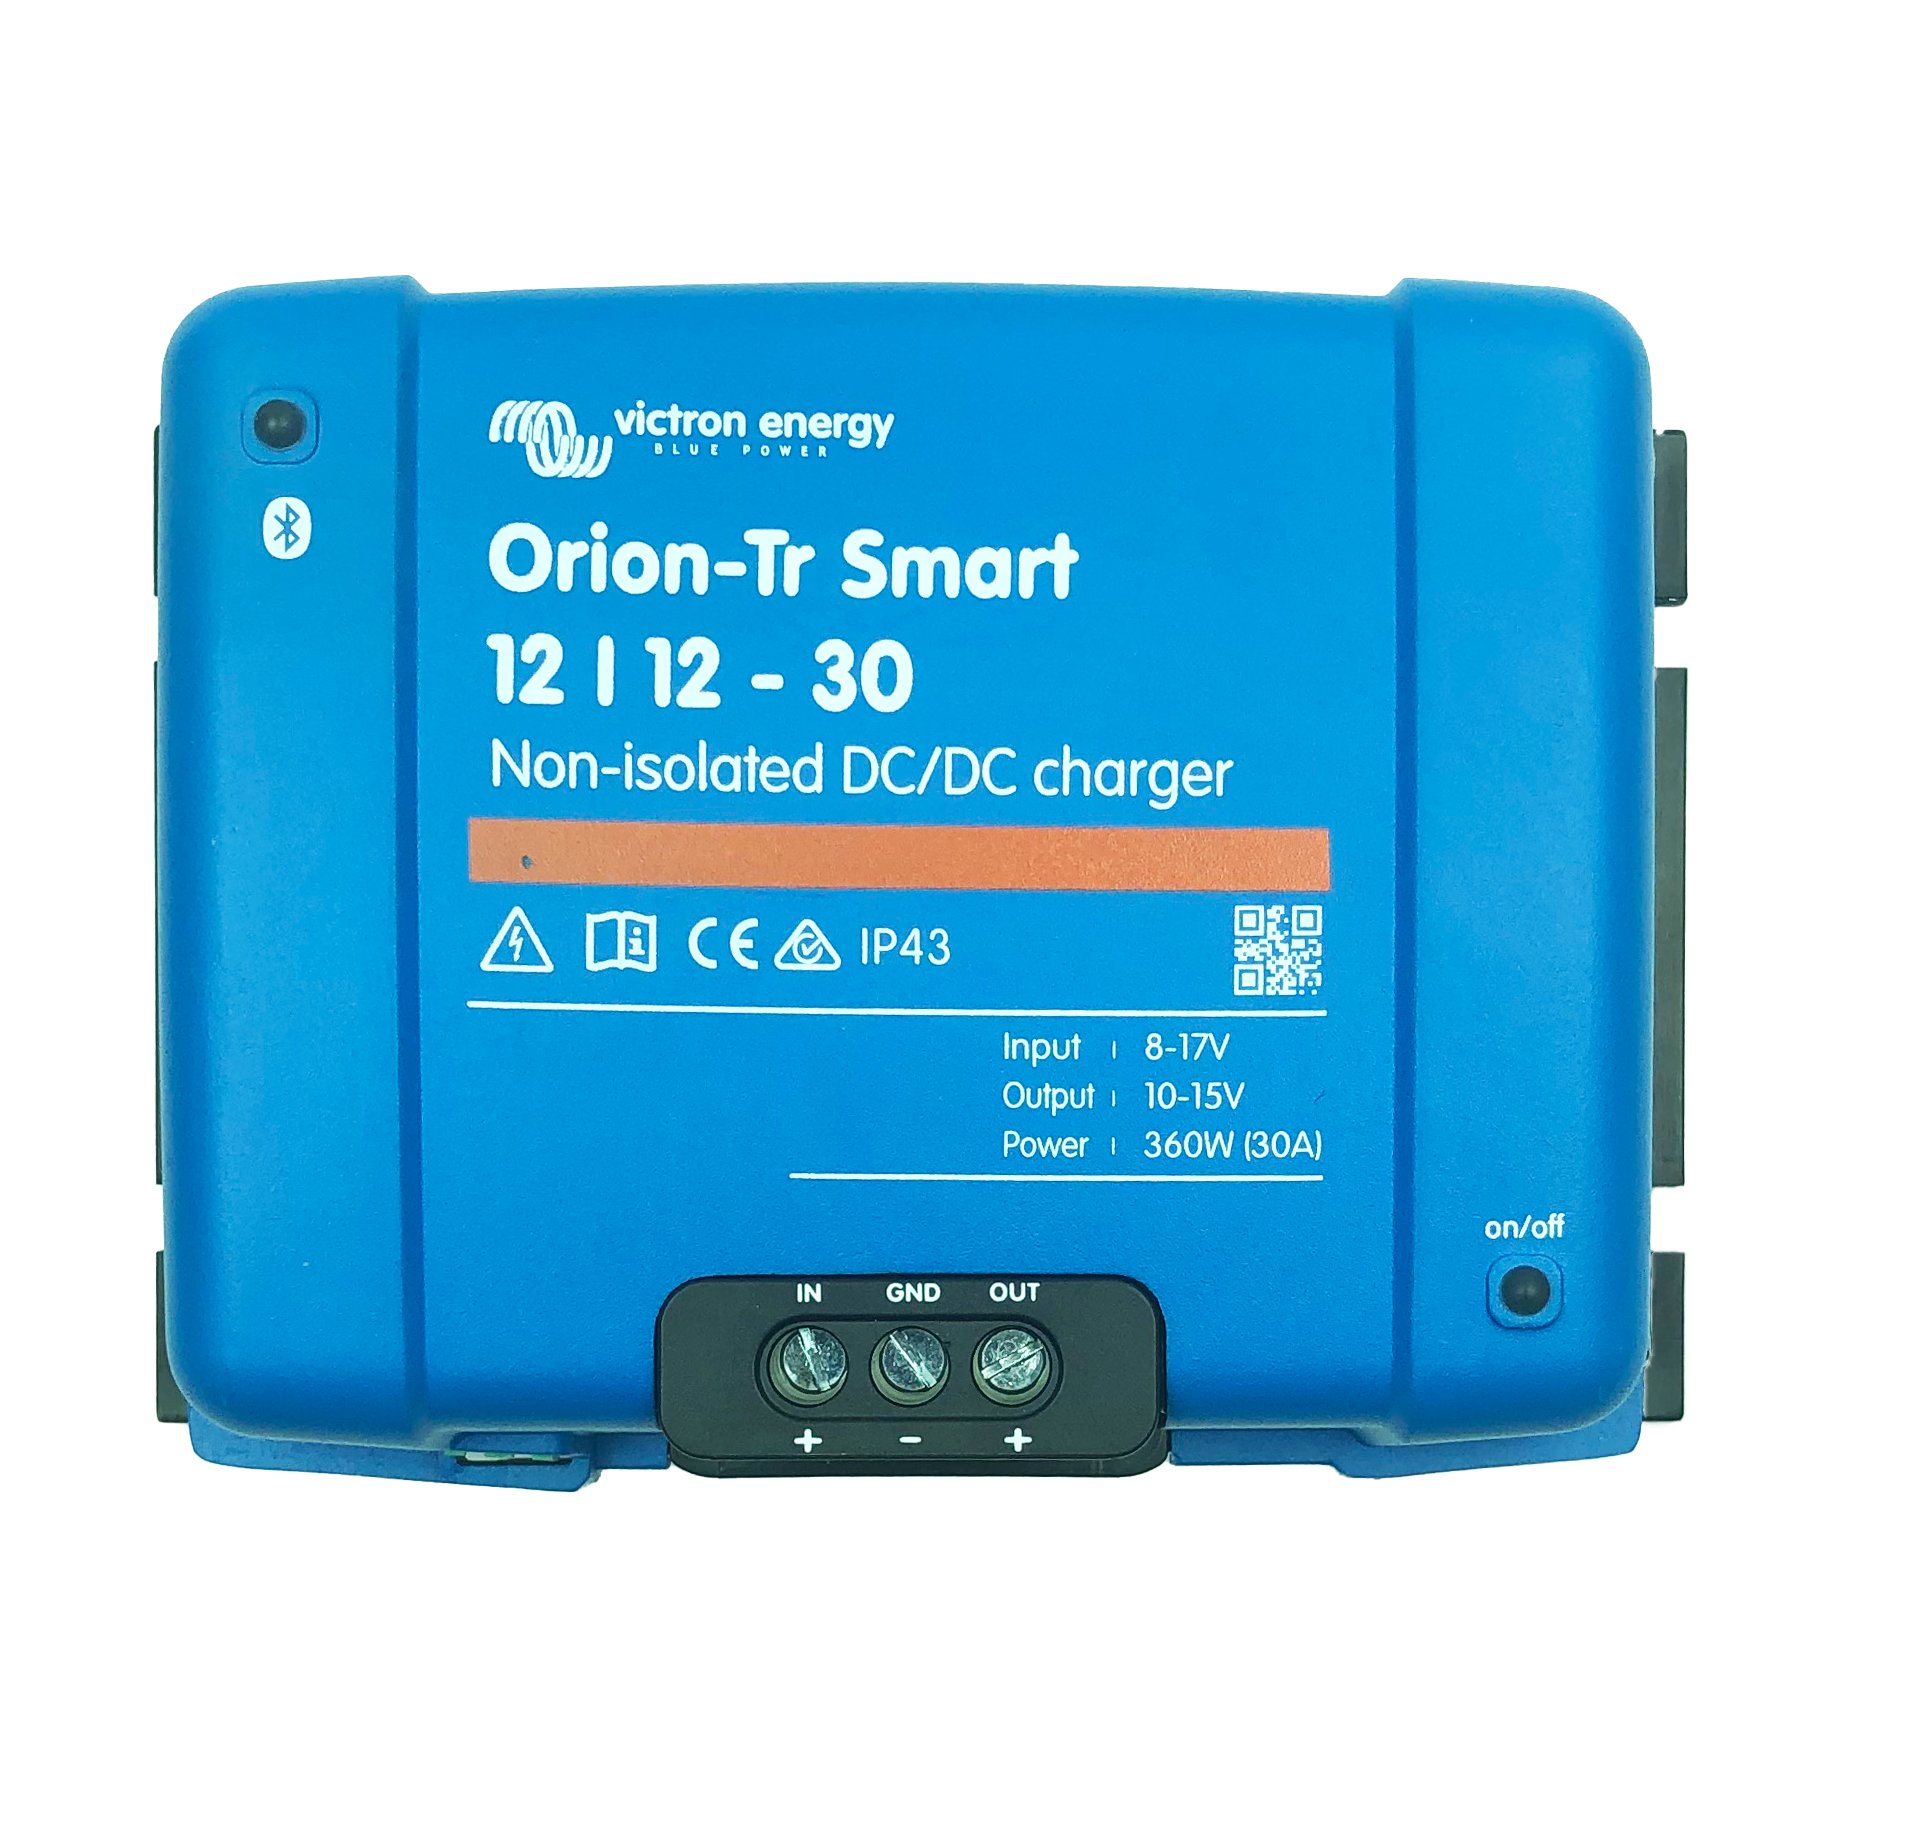 I am wanting to use the Victron smart mppt for my solar on my trailer and also want to charge from my tow vehicle. Am I able to charge from both at the same time? Will they "talk to each other? I have LIfpo batteries.